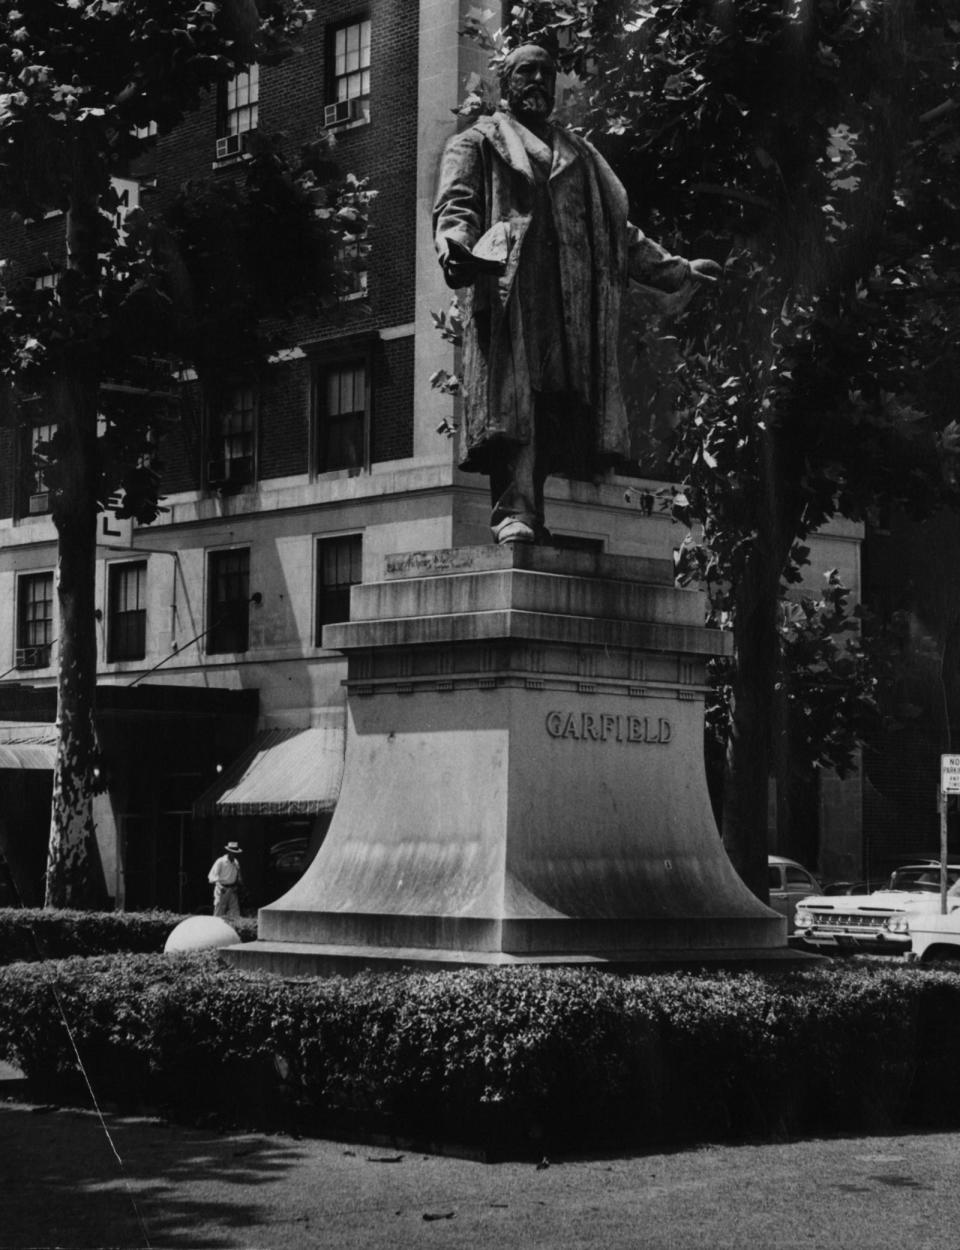 Cincinnati's statue of former President James A. Garfield, pictured in March 1969, had stood in the center of Garfield Place and Race Street from 1887 to 1915. Garfield, an Ohioan, was mortally wounded by a gunshot four months into his presidency in 1881.